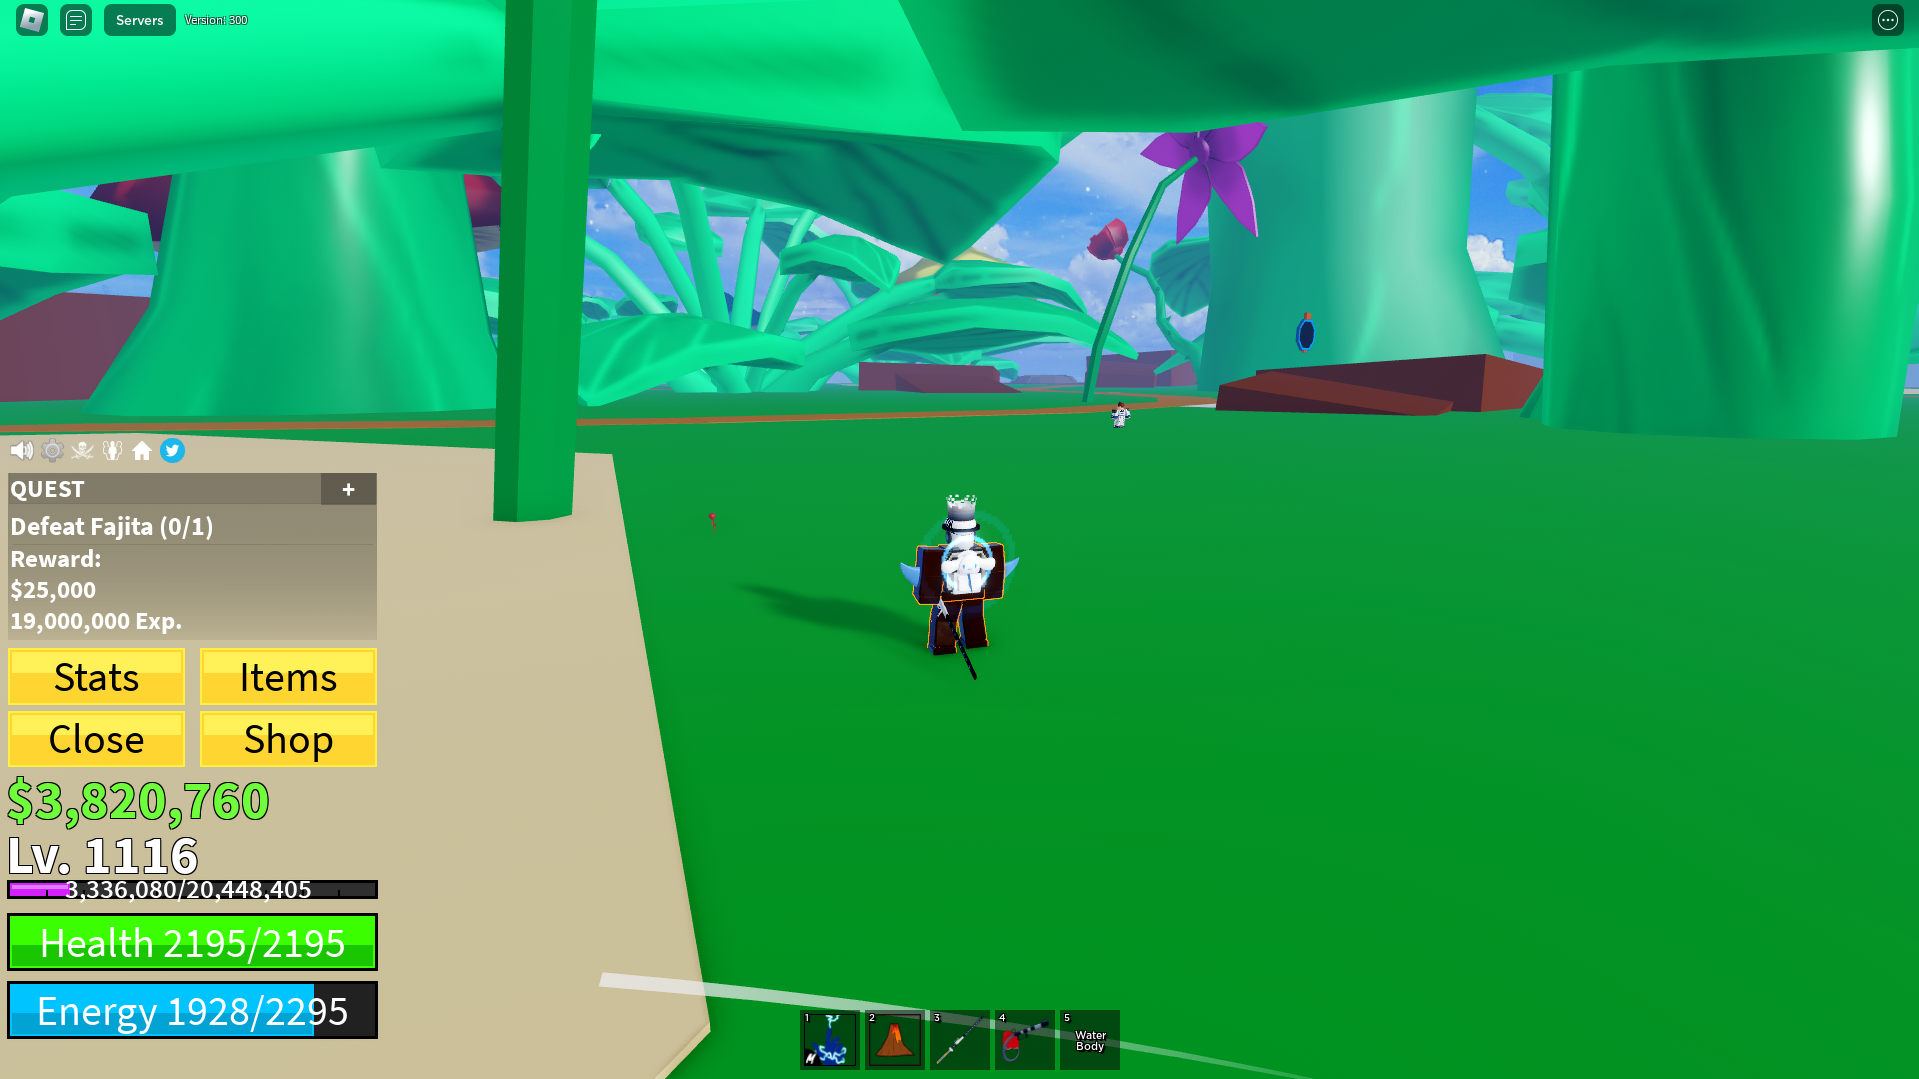 Easy Location] Where Does Blue Flower Spawn in Blox Fruit? in 2023